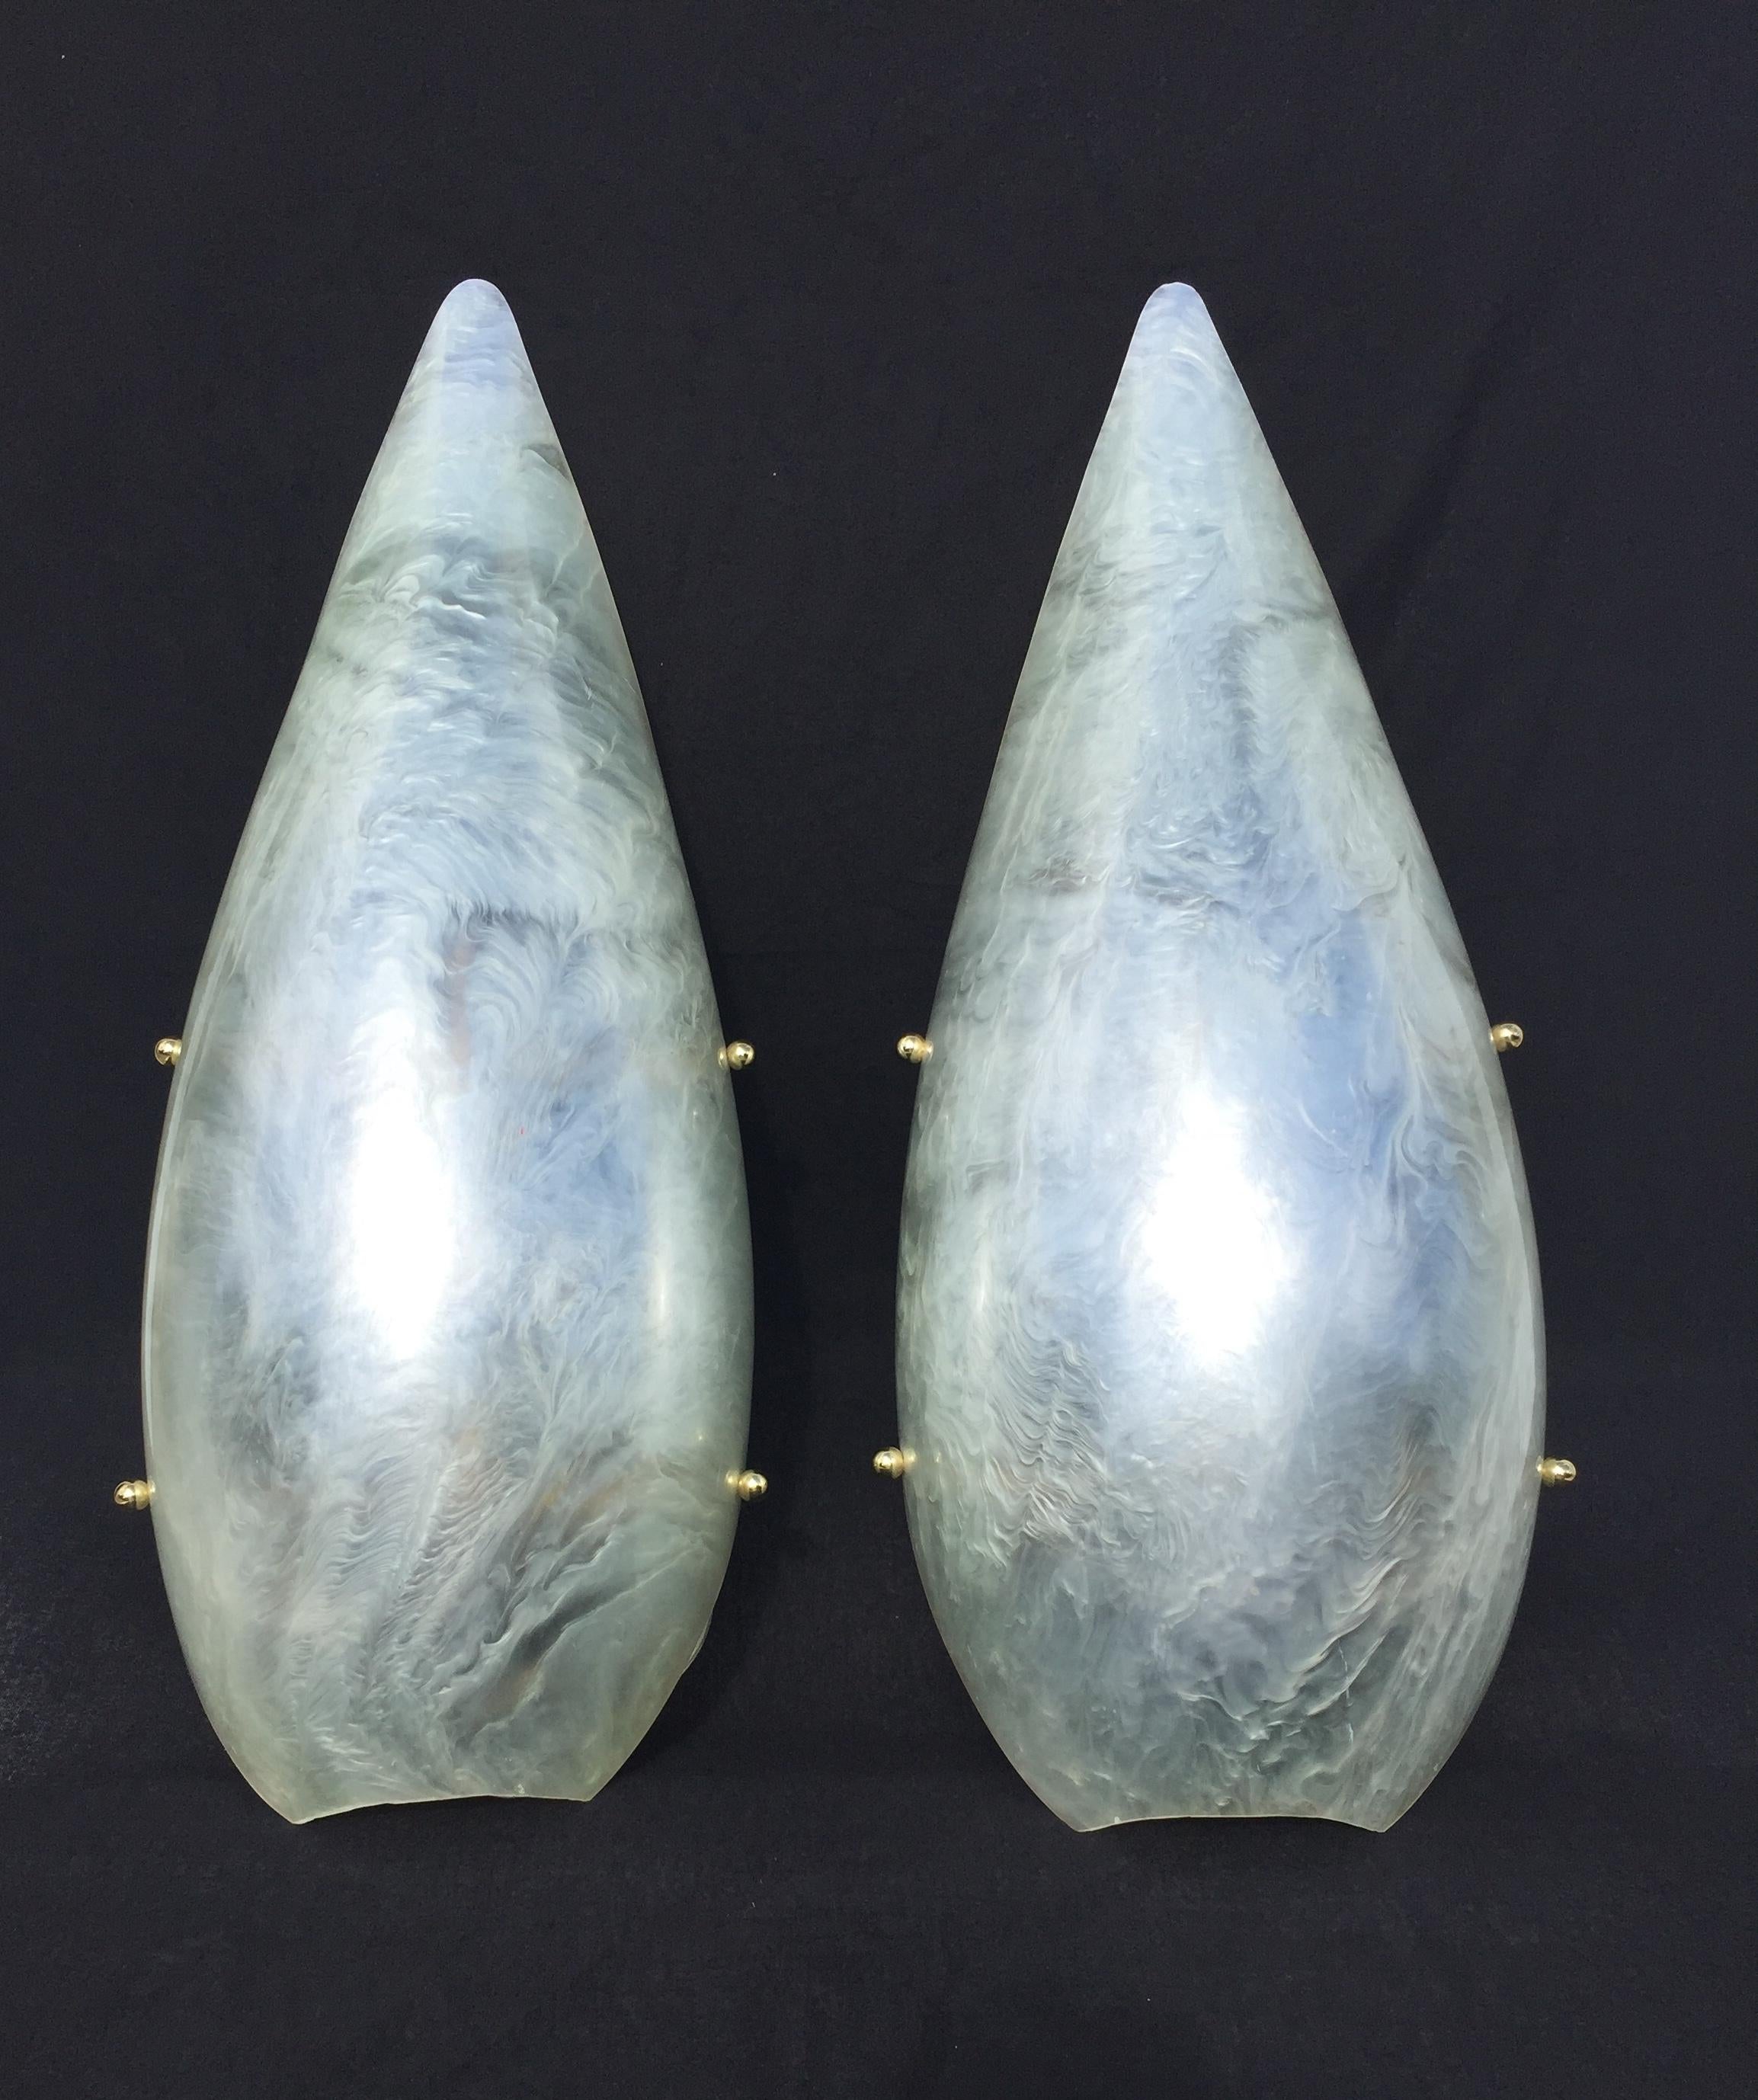 Pair of pearly white sconces in resin, great light when it’s coming through the translucid material.
The great shape, makes a perfectly elegant wall decoration and wall lights as well.
Re wired for US recently.